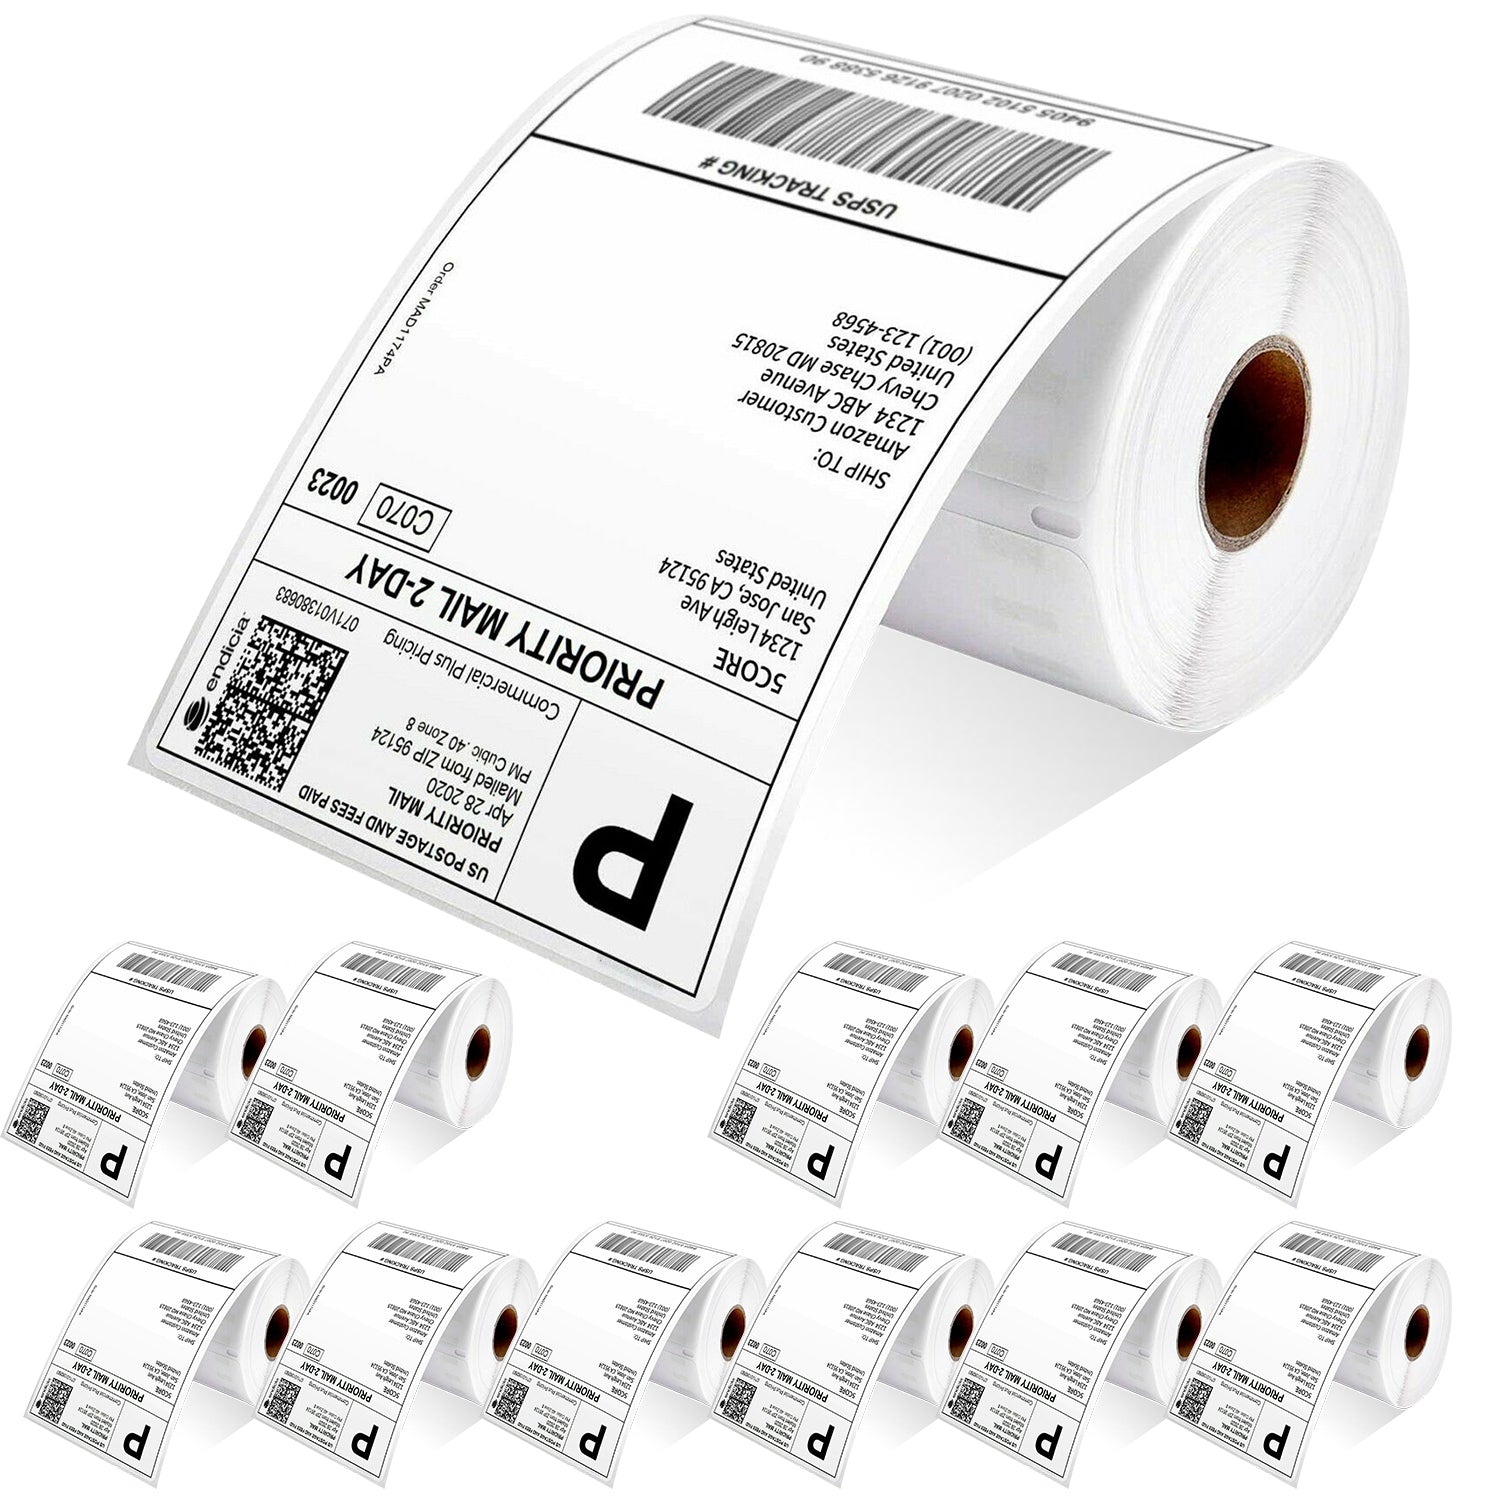 5 Core 4x6" Thermal Shipping Label Commercial Grade 12 Rolls Direct Labels 250/paper ZP450 Sticker